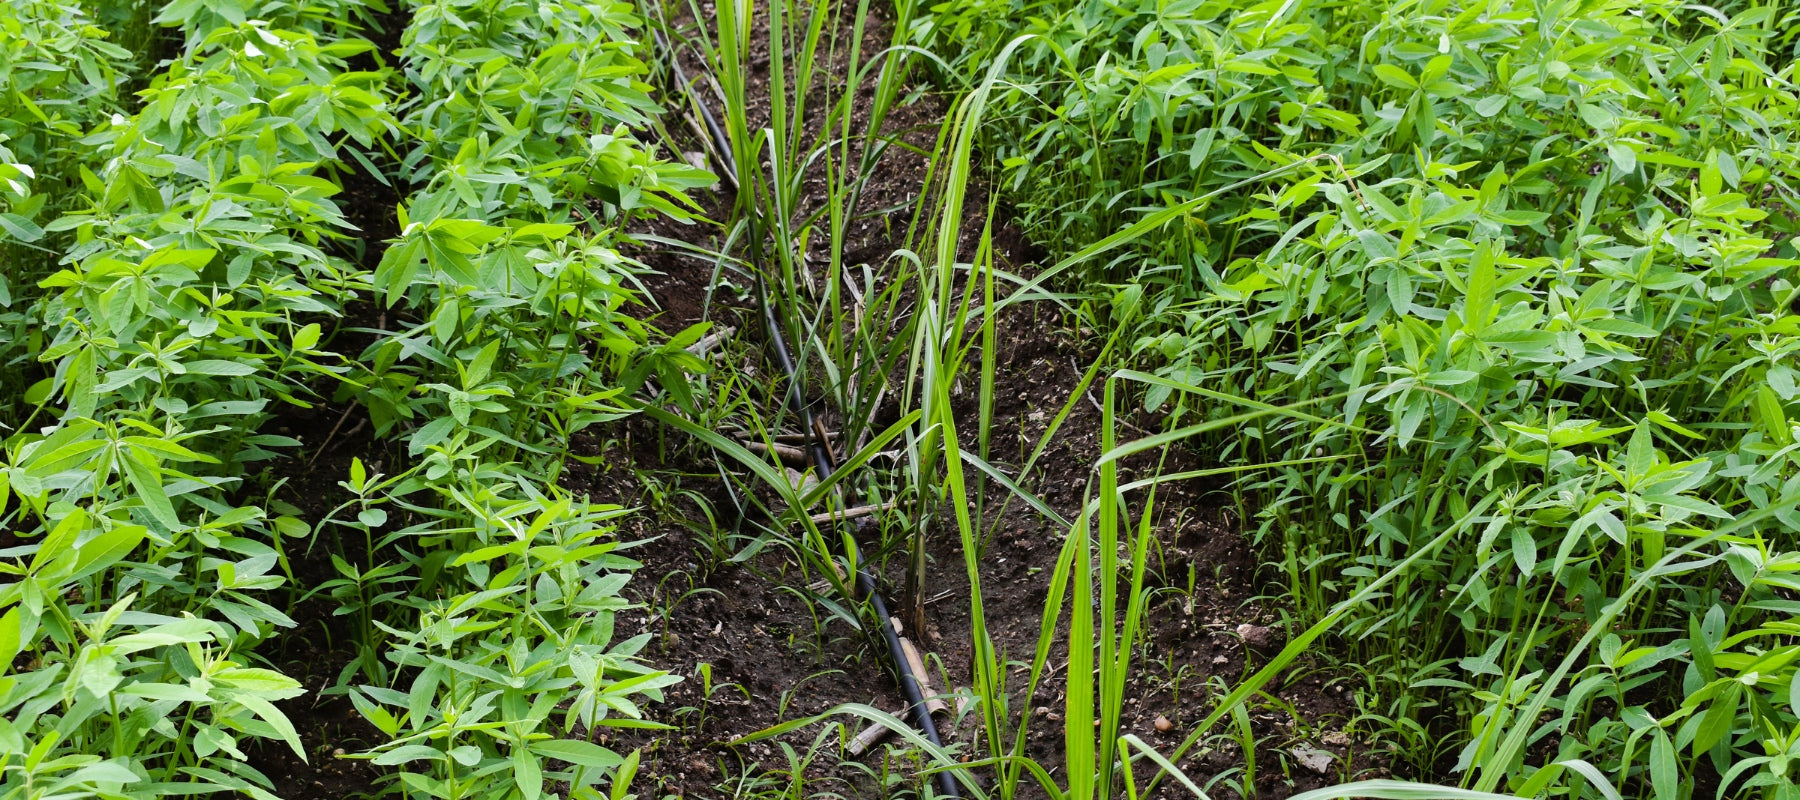 Cover crops and green manures in home gardens